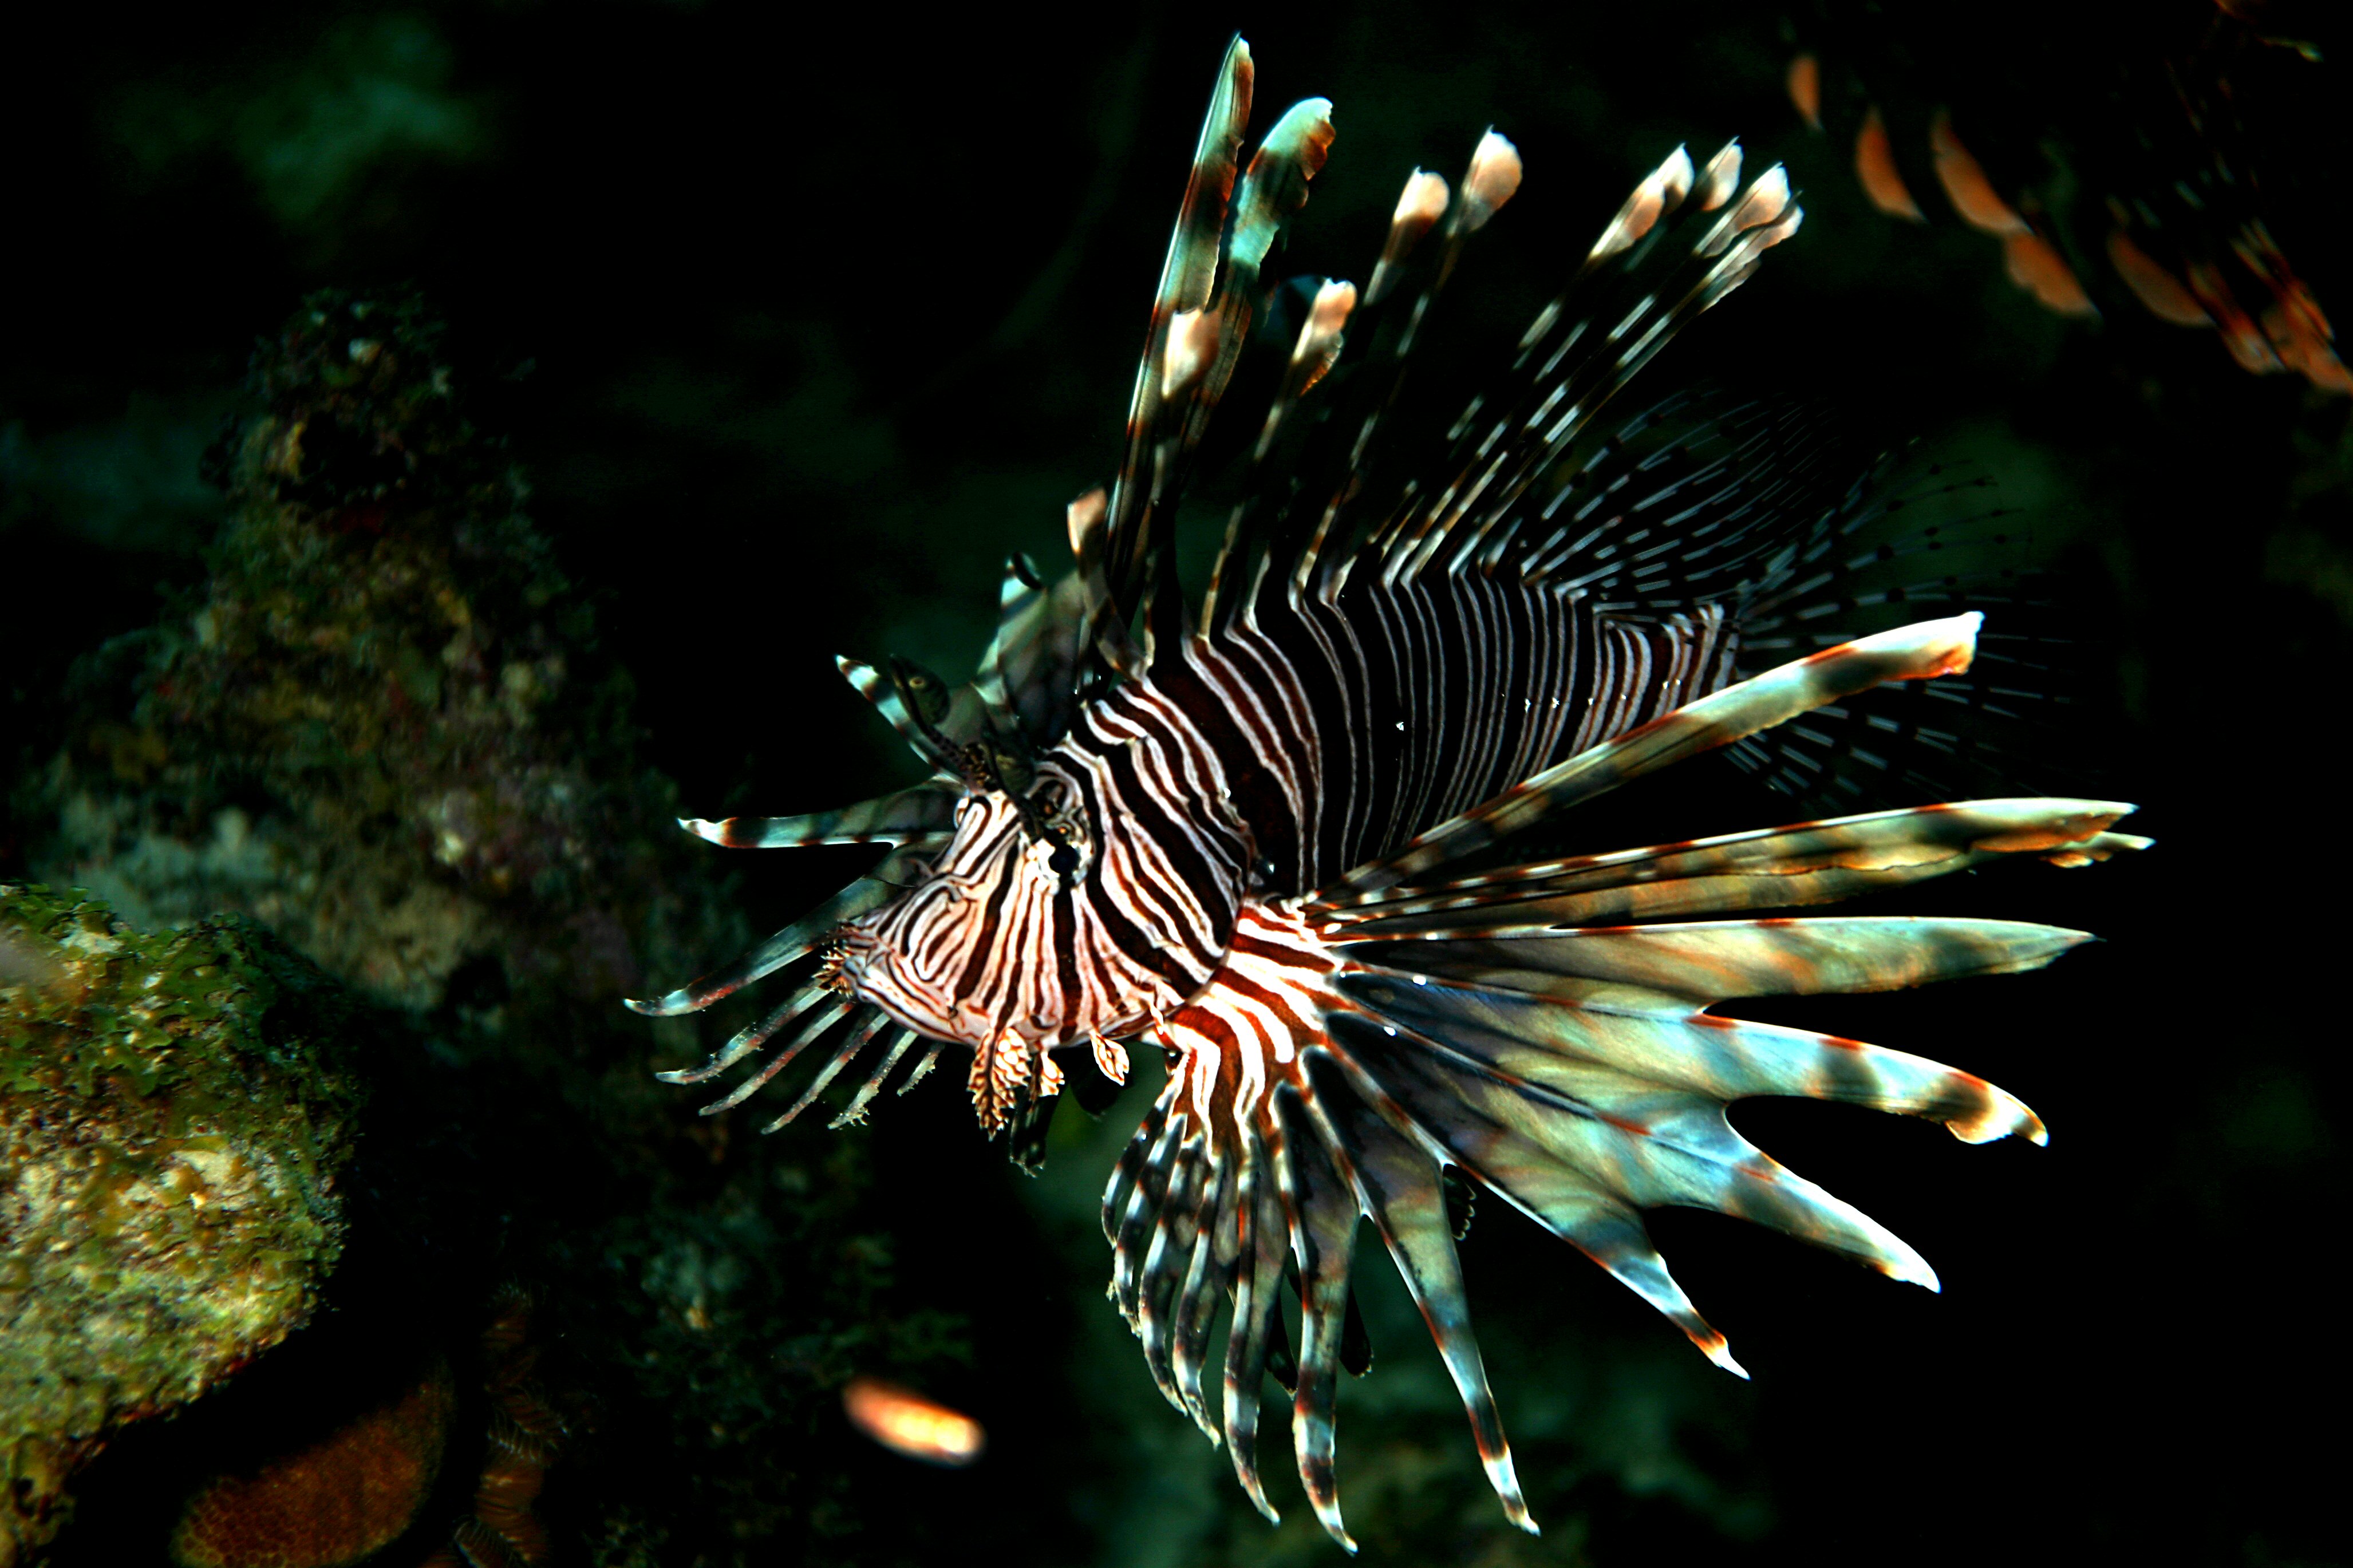 Updating fluid-powered machines: Scientists design bizarre-looking lionfish powered by a blood-like compound